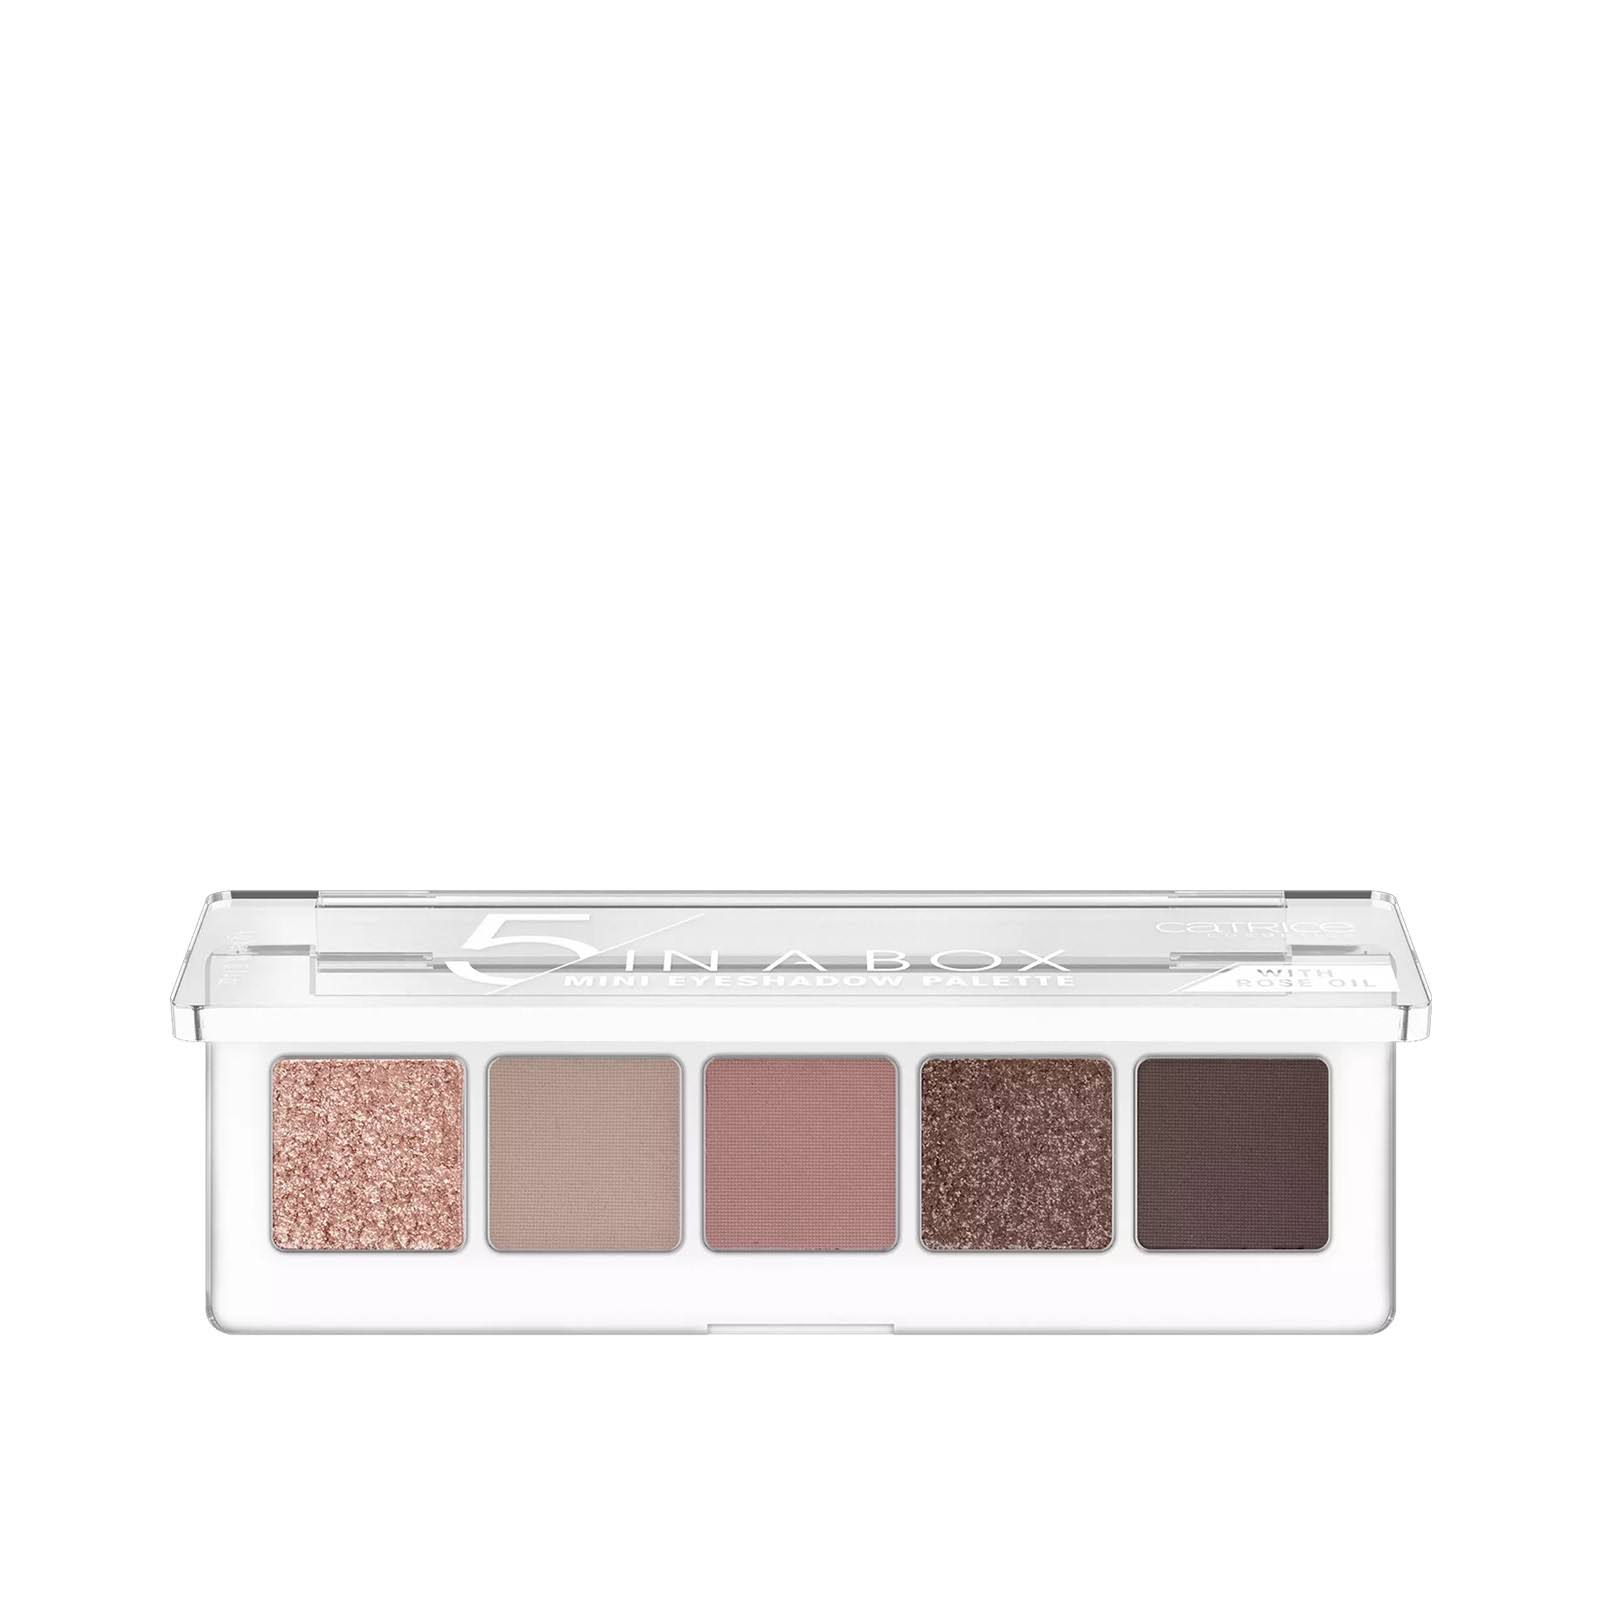 Catrice 5 in A Box Mini Eyeshadow Palette 020 Soft Rose Look